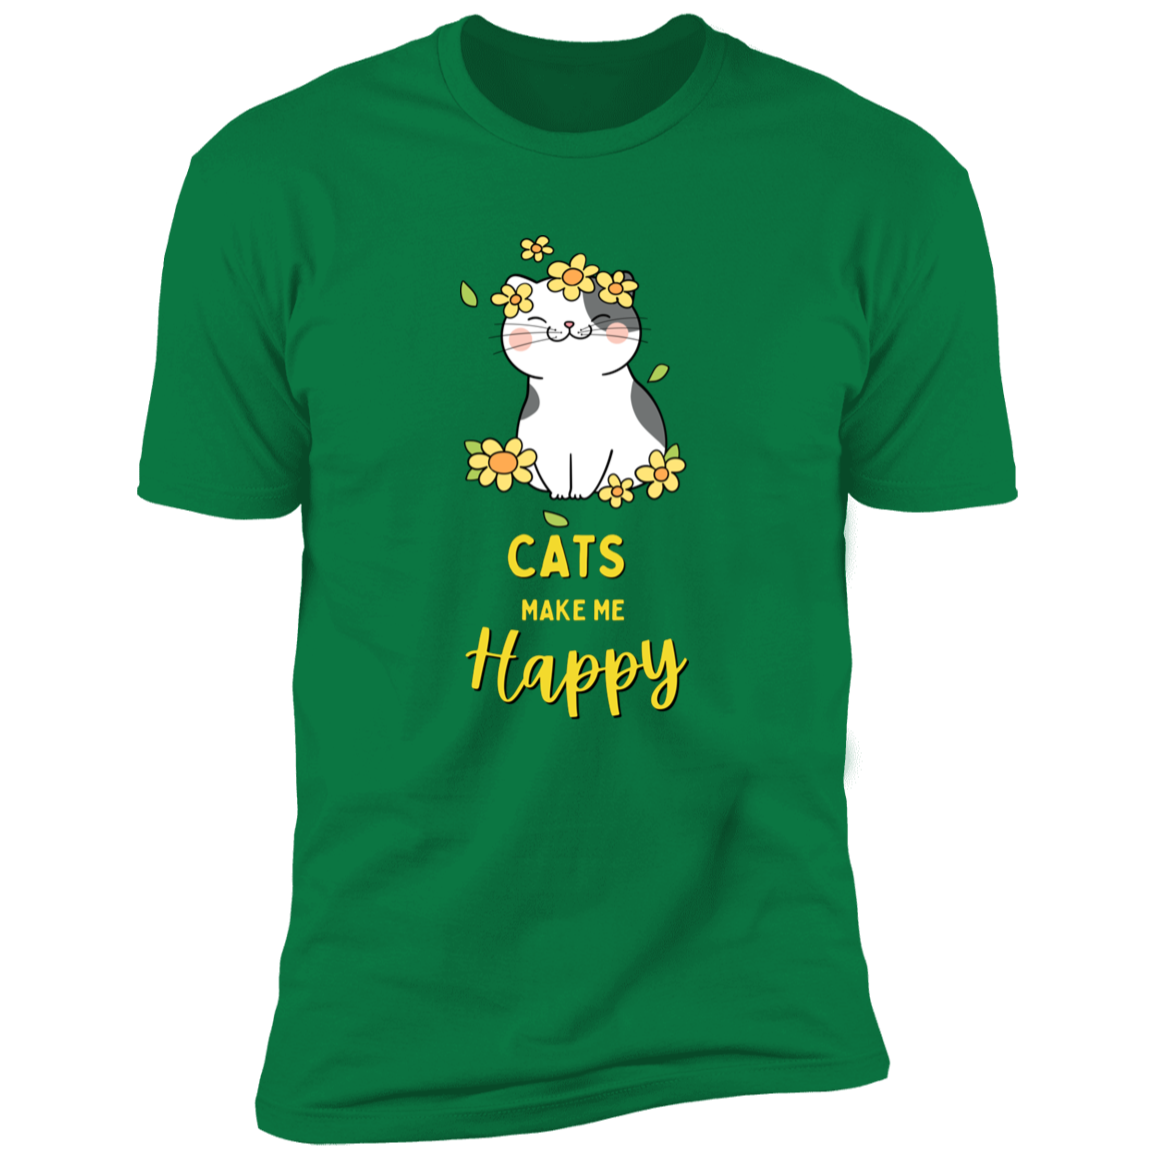 Cats Make Me Happy T-shirt, Cat Shirt for humans, in kelly green